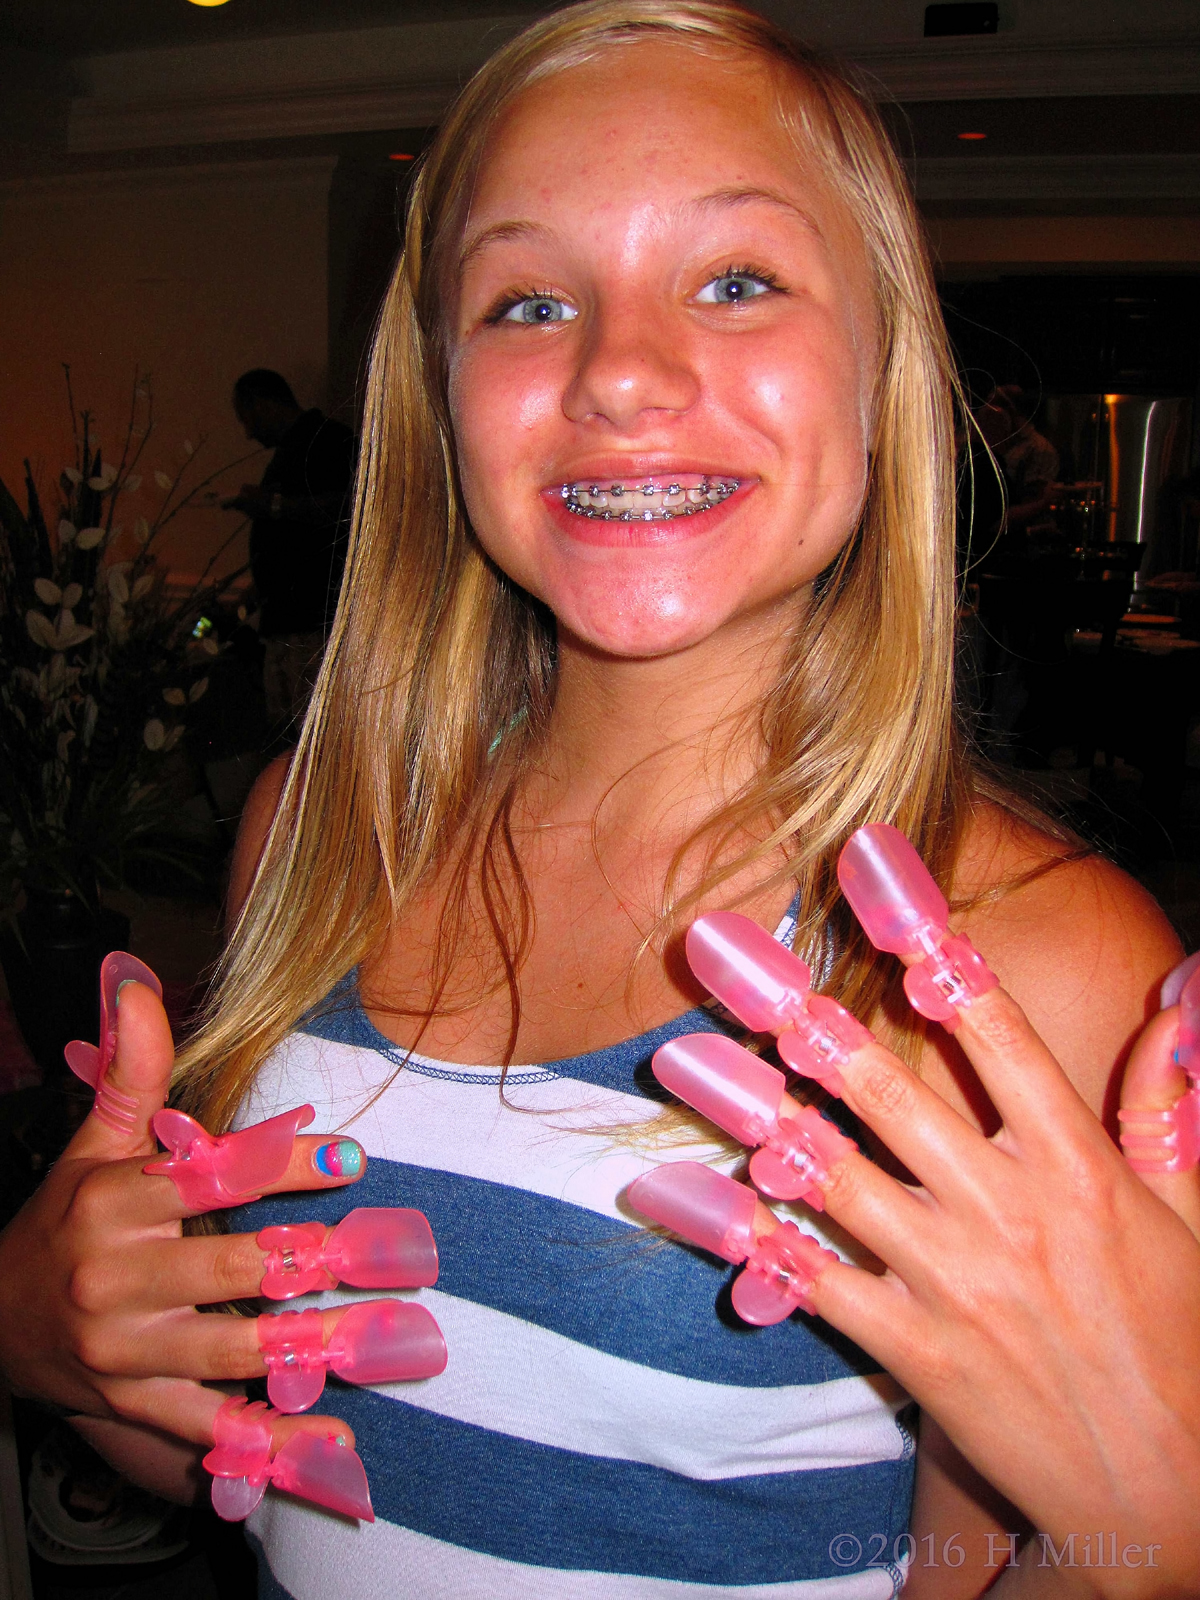 Looking Pretty In Her Manicure Protectors 